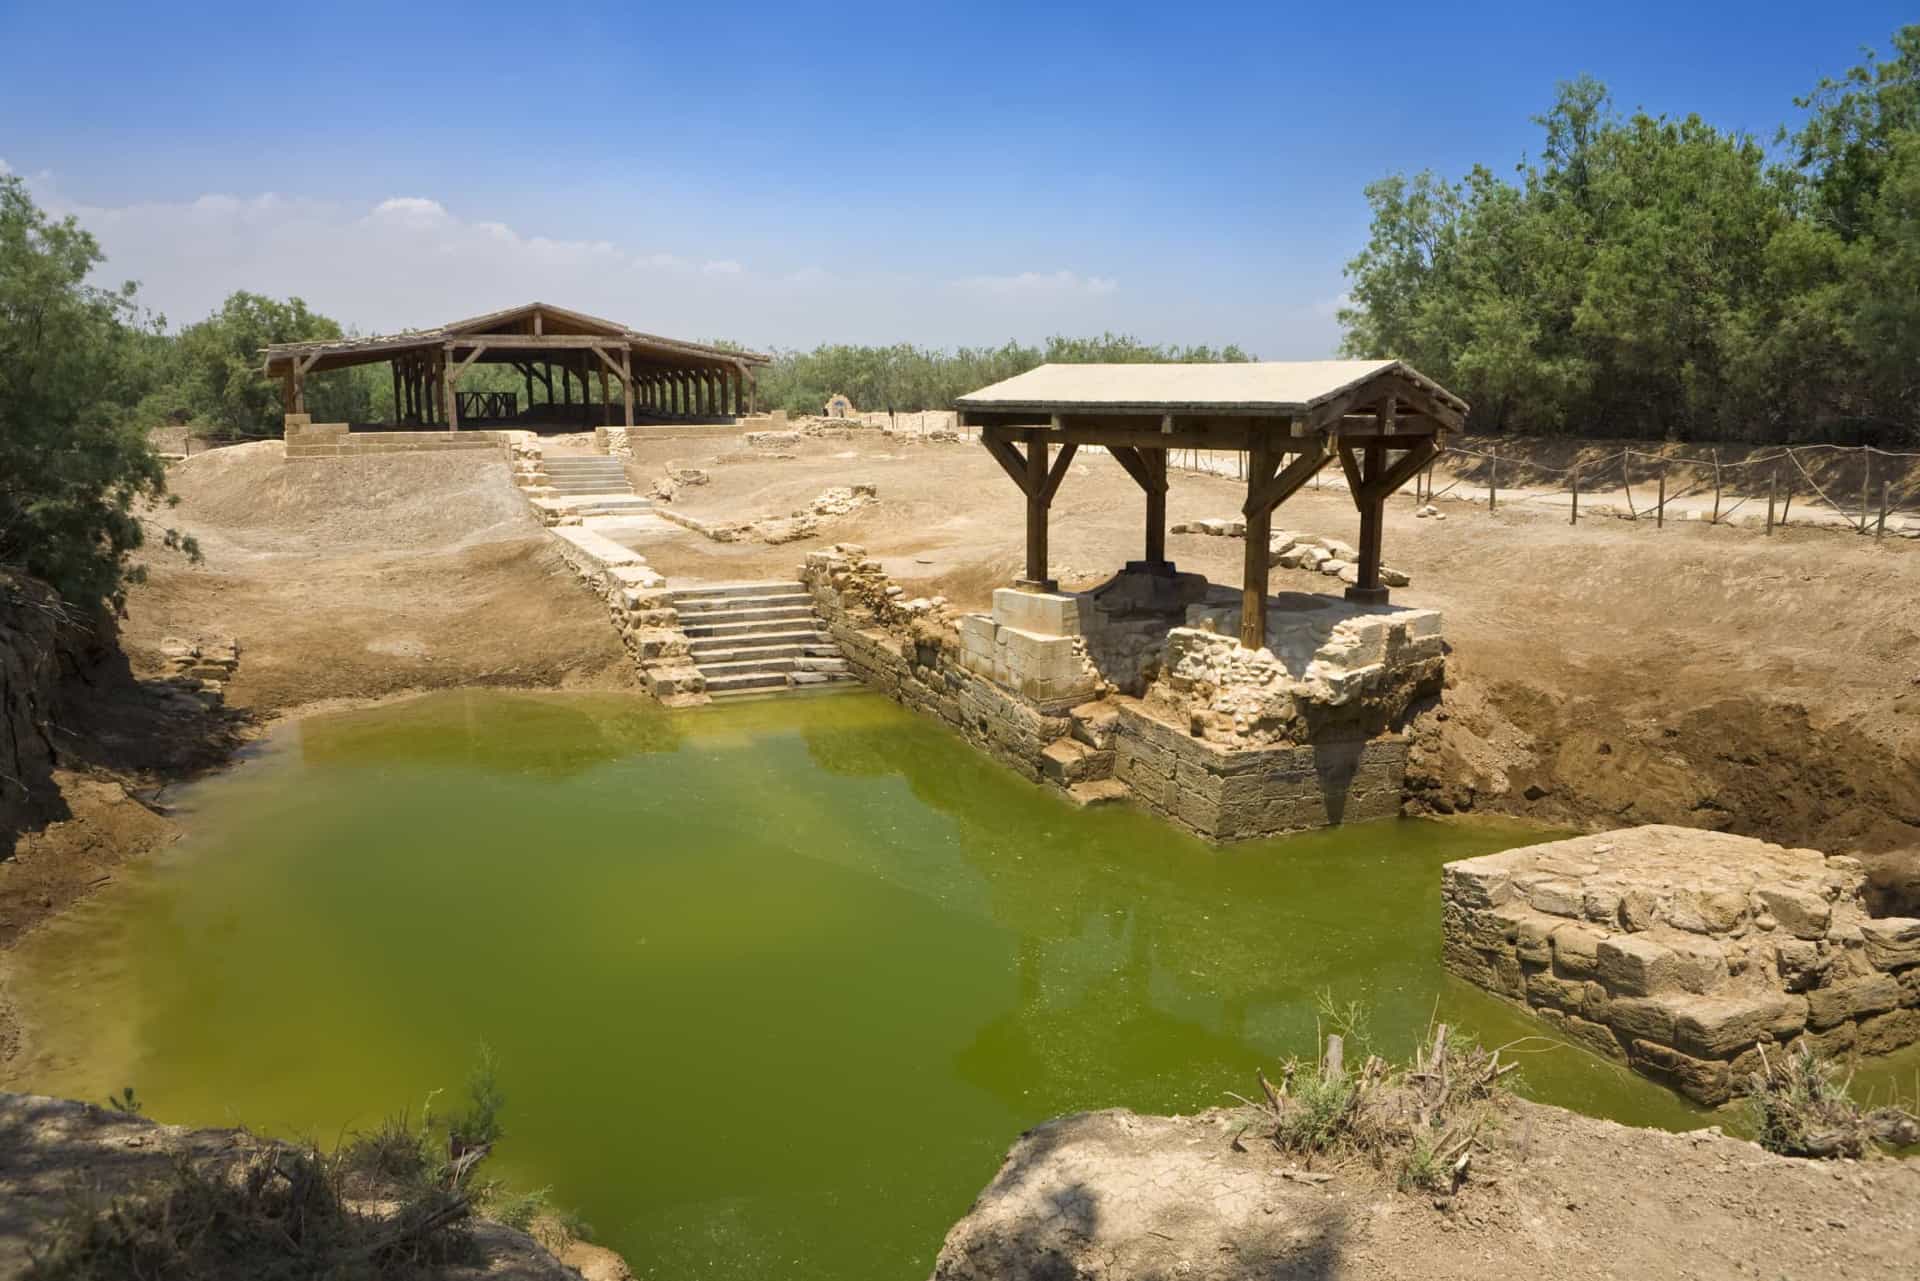 <p>Located on the east bank of the Jordan River is Al-Maghtas, better known as Bethany beyond the Jordan and considered to be the original location of the Baptism of Jesus by John the Baptist. Over the centuries, the river has changed its course, and the water that nourishes the location is today little more than a trickle.</p>